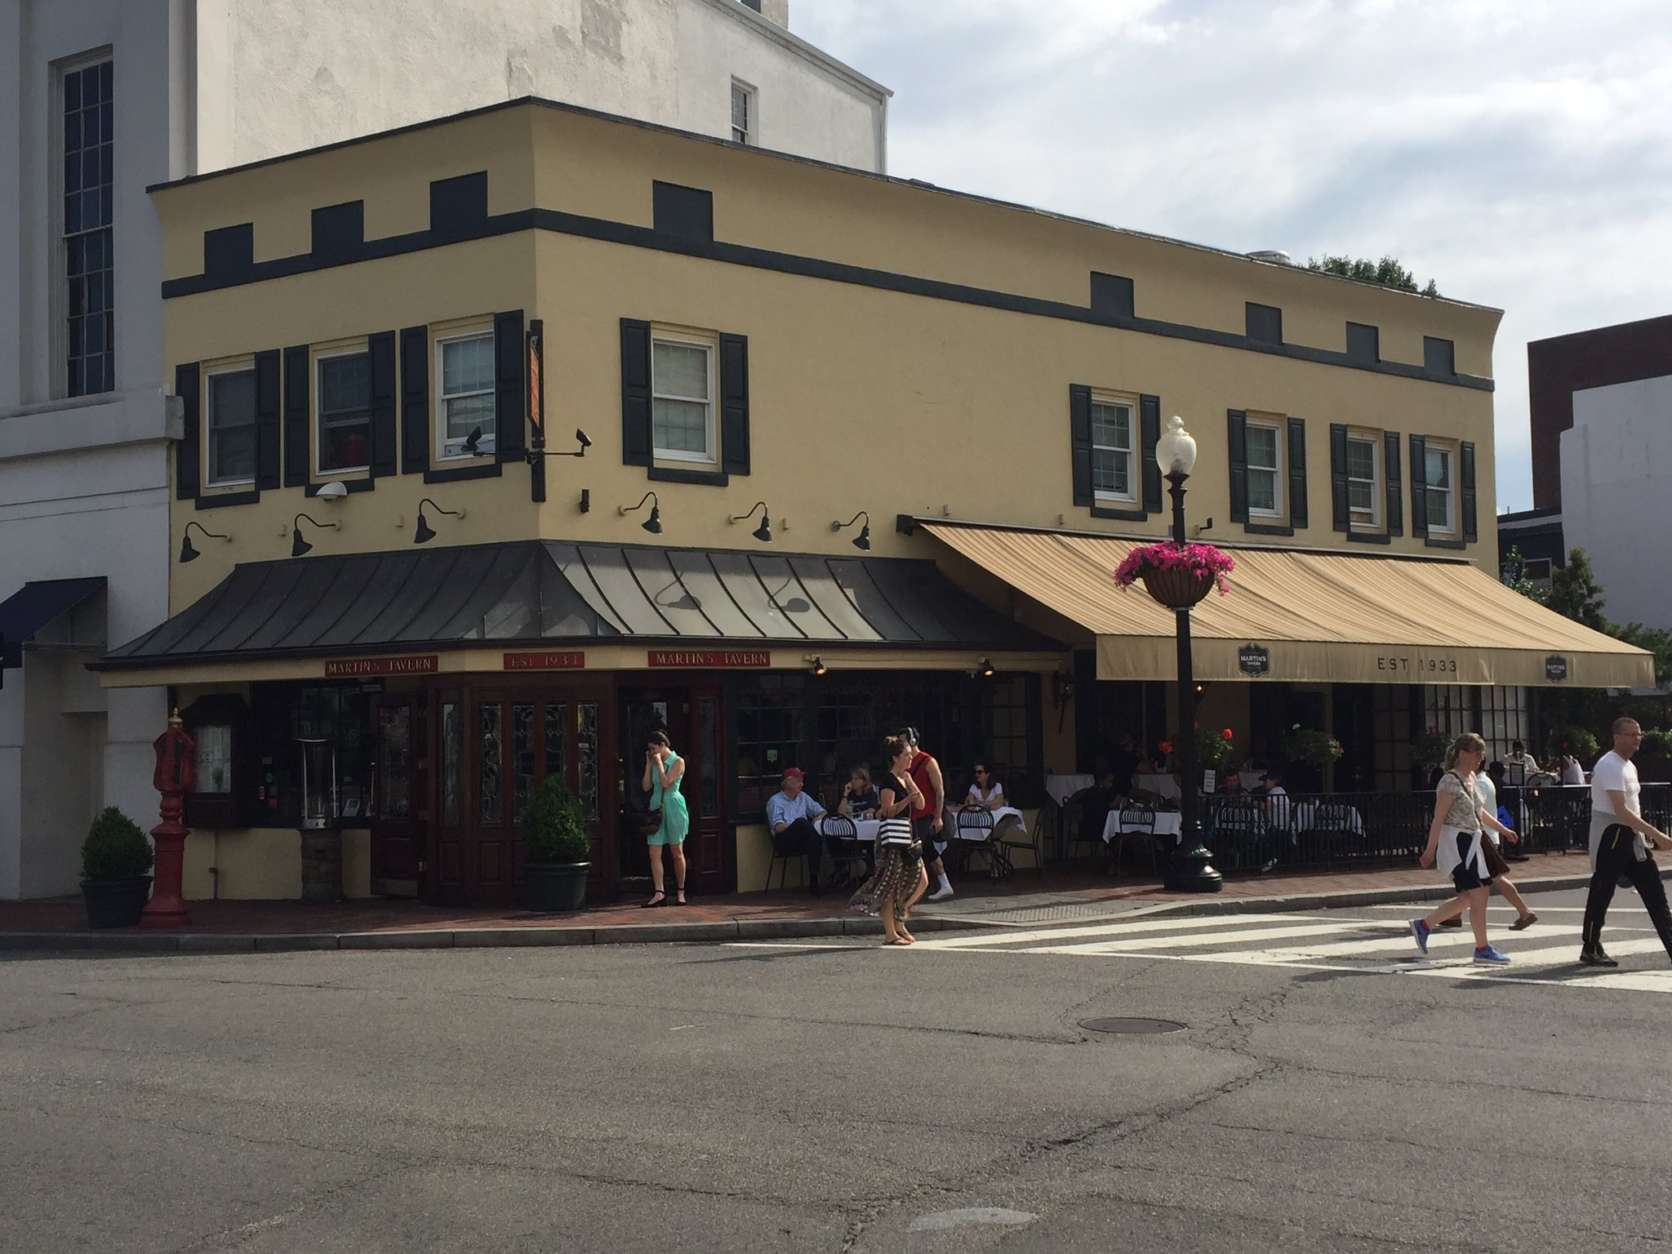 Martin's Tavern opened in 1933 and is the oldest family-owned restaurant in D.C. (WTOP/Michelle Basch)